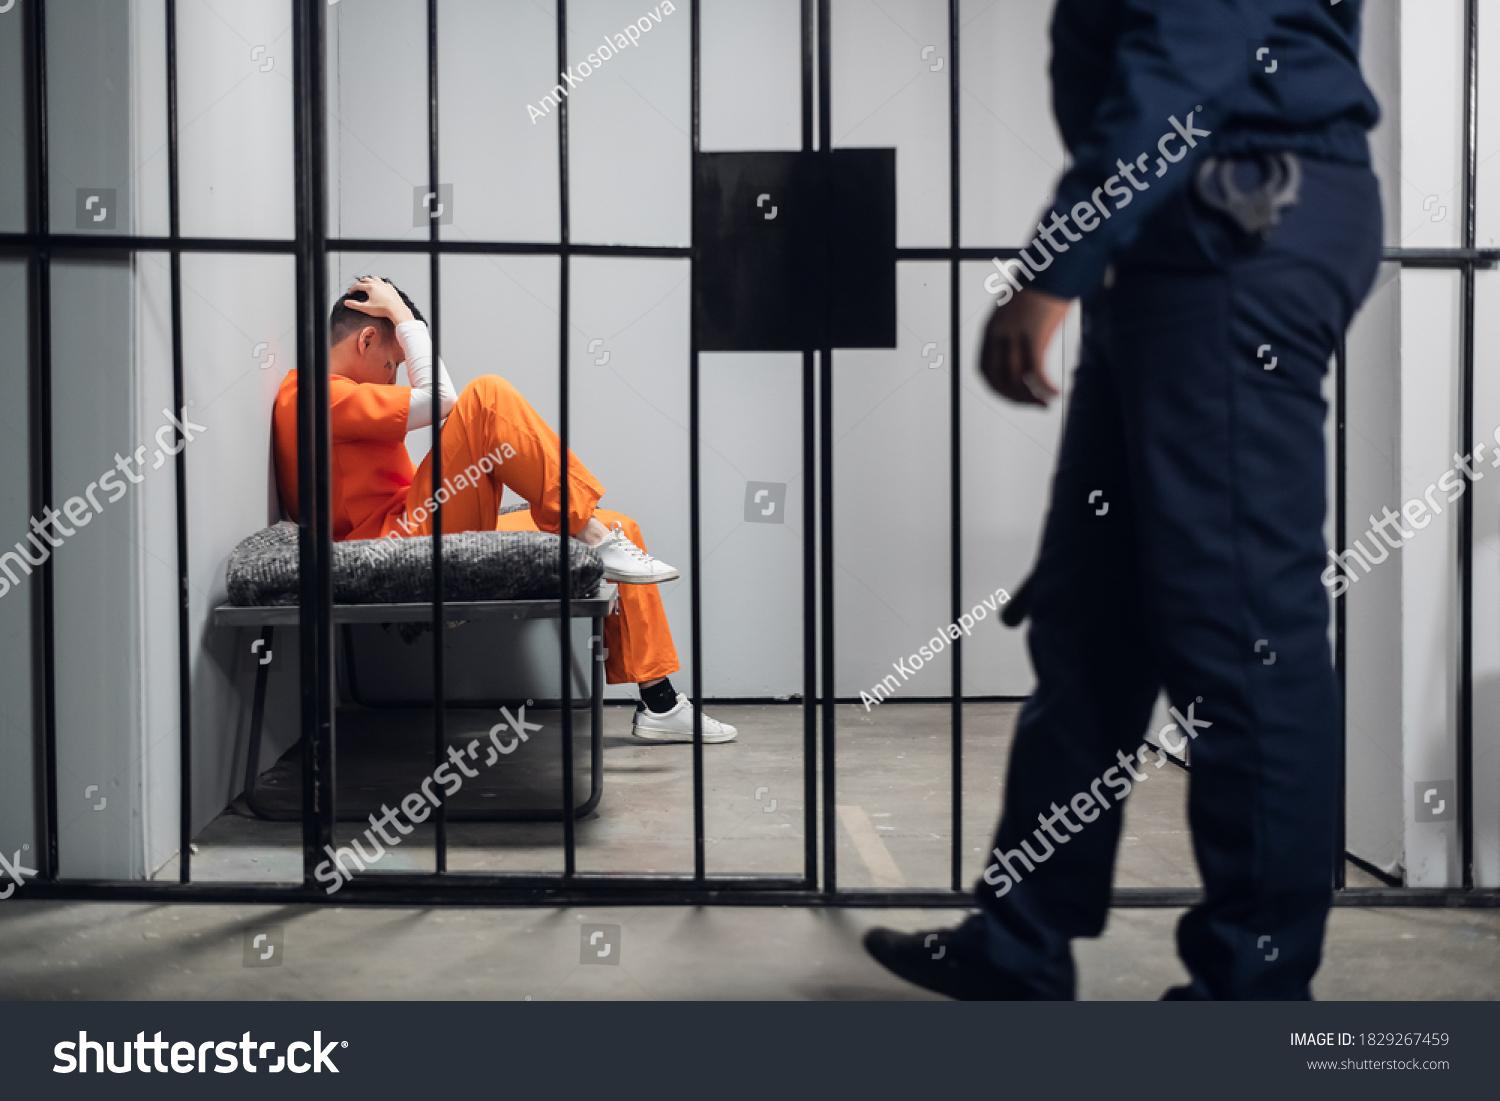 A prison guard makes a tour of the cells in a high-security prison. The cells are occupied by criminals in red robes #1829267459